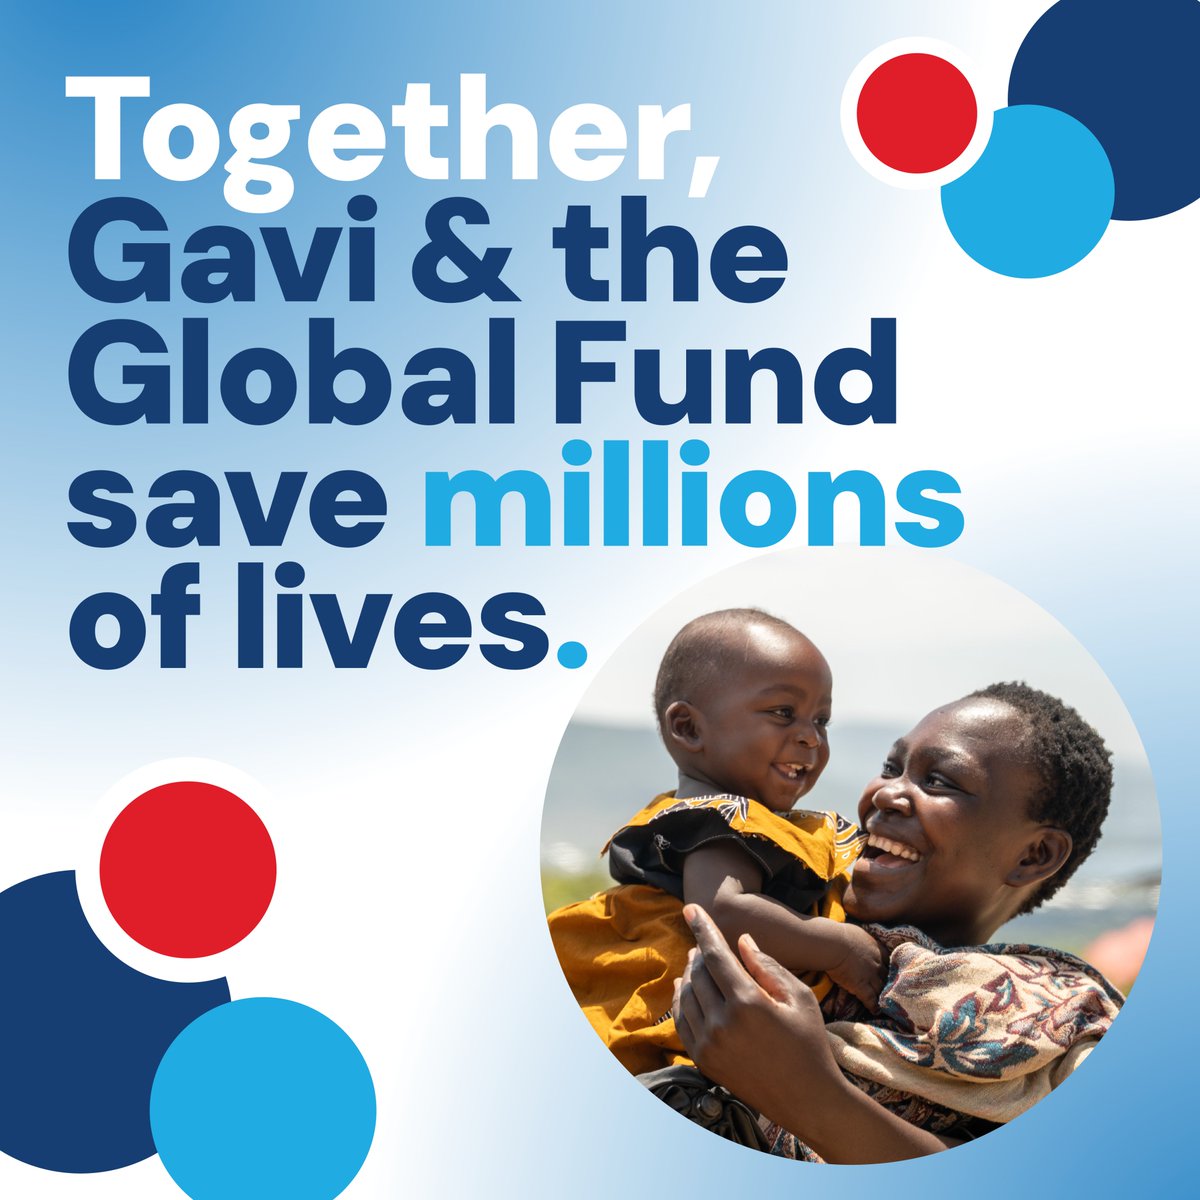 ‘We know vaccines work - but it’s so important the UK continues to play a leading role in helping to end disease and save lives by investing in @GlobalFund & @gavi': We were proud to work with @savechildrenuk @resultsuk @ONEintheUK @UNICEF_uk to raise this in parliament yesterday